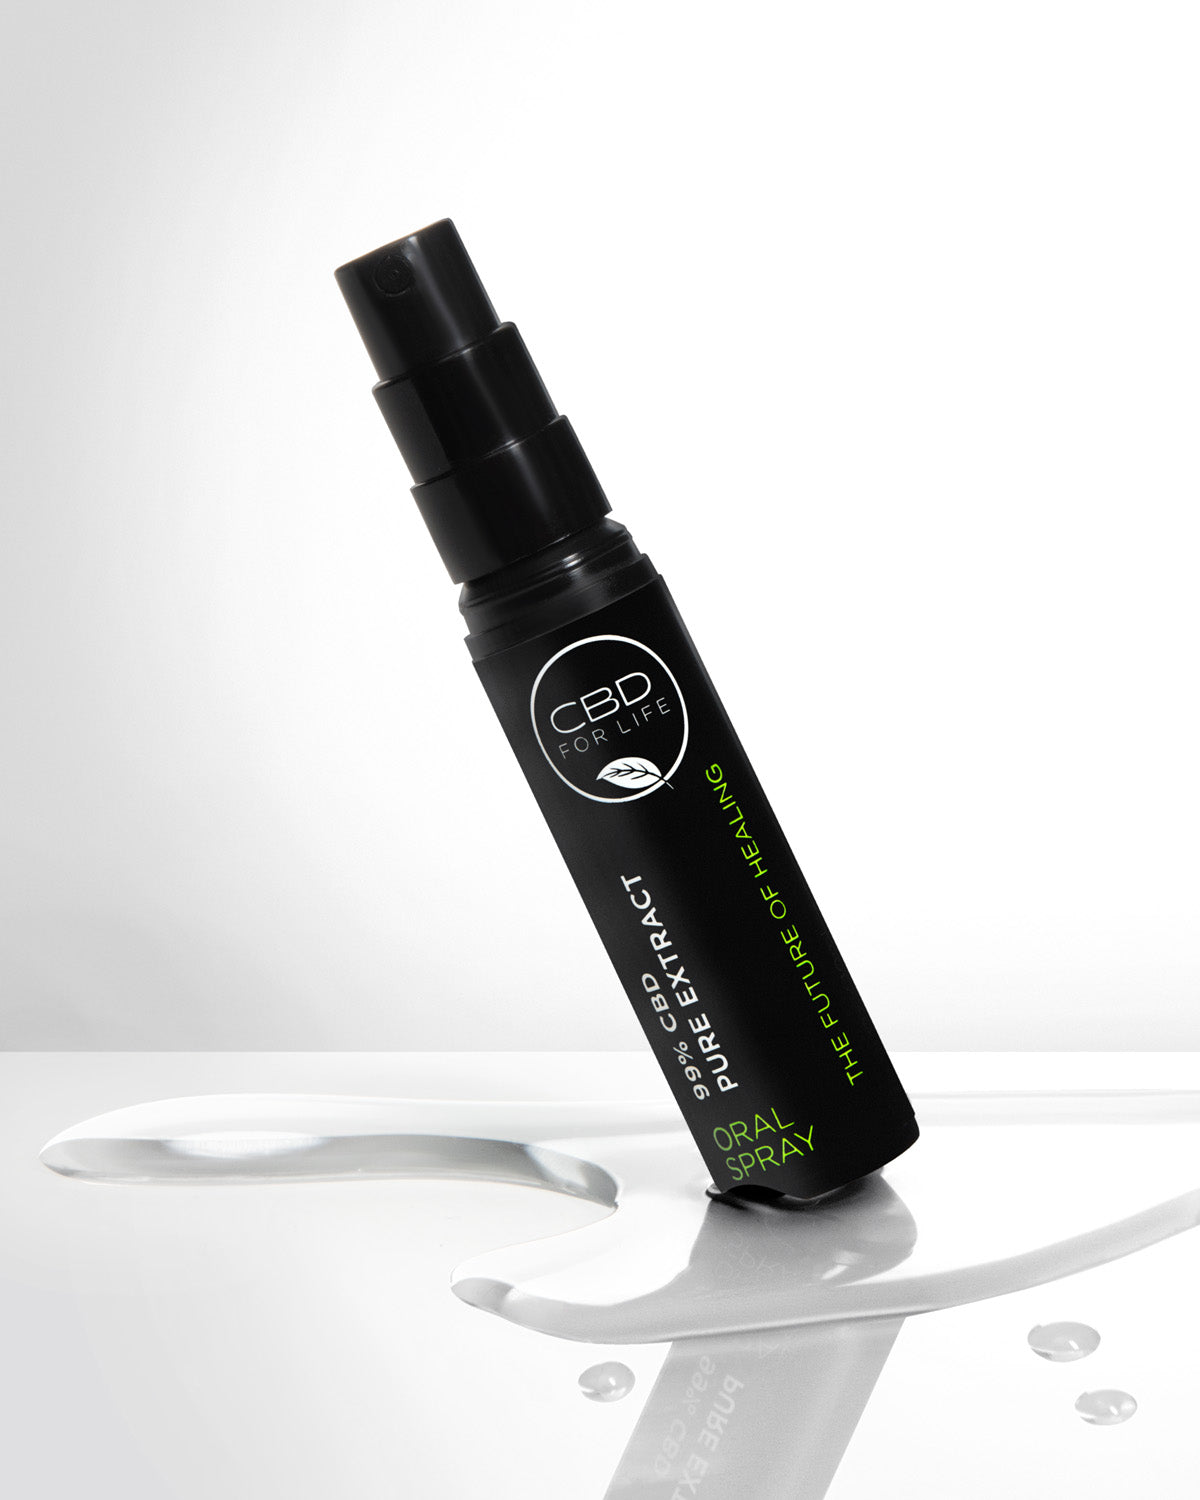 The CBD product you never knew you needed and now won’t be able to live without. Our CBD Spray is water soluble, which means your body absorbs it more readily so you experience quicker results. Plus, it’s super convenient—slips right into your bag or pocket for a quick spritz of calm whenever you need it and wherever you go